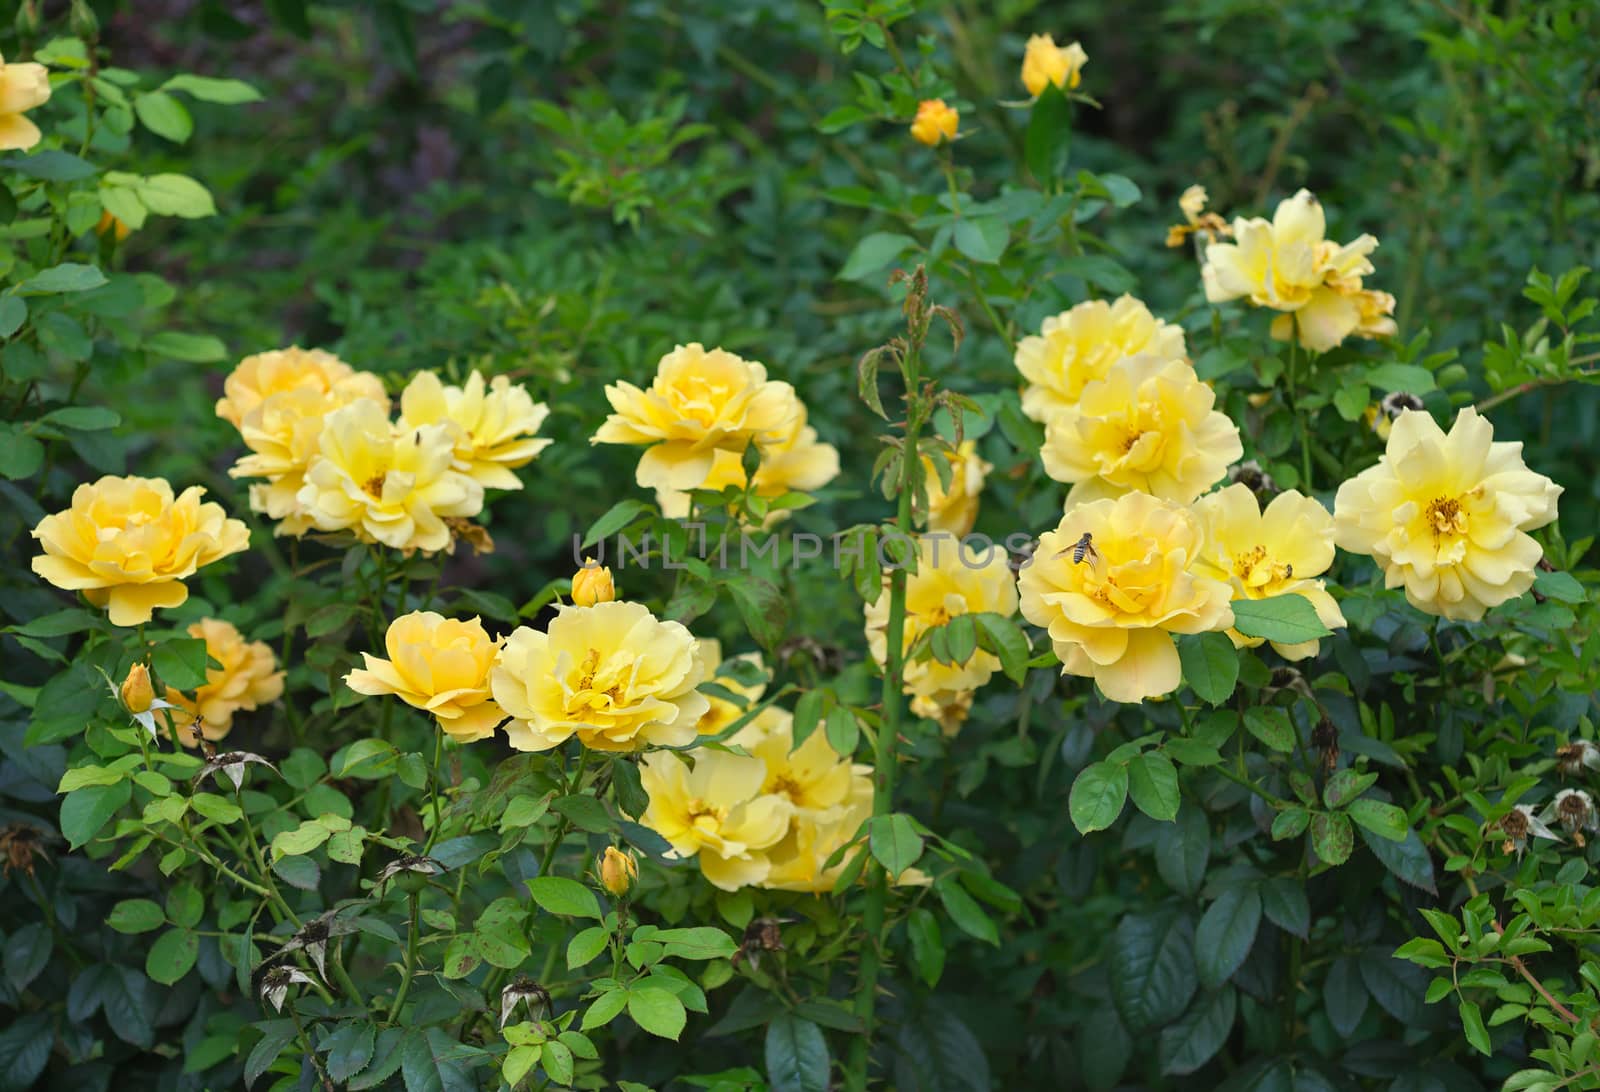 Many yellow roses blossoming in green garden